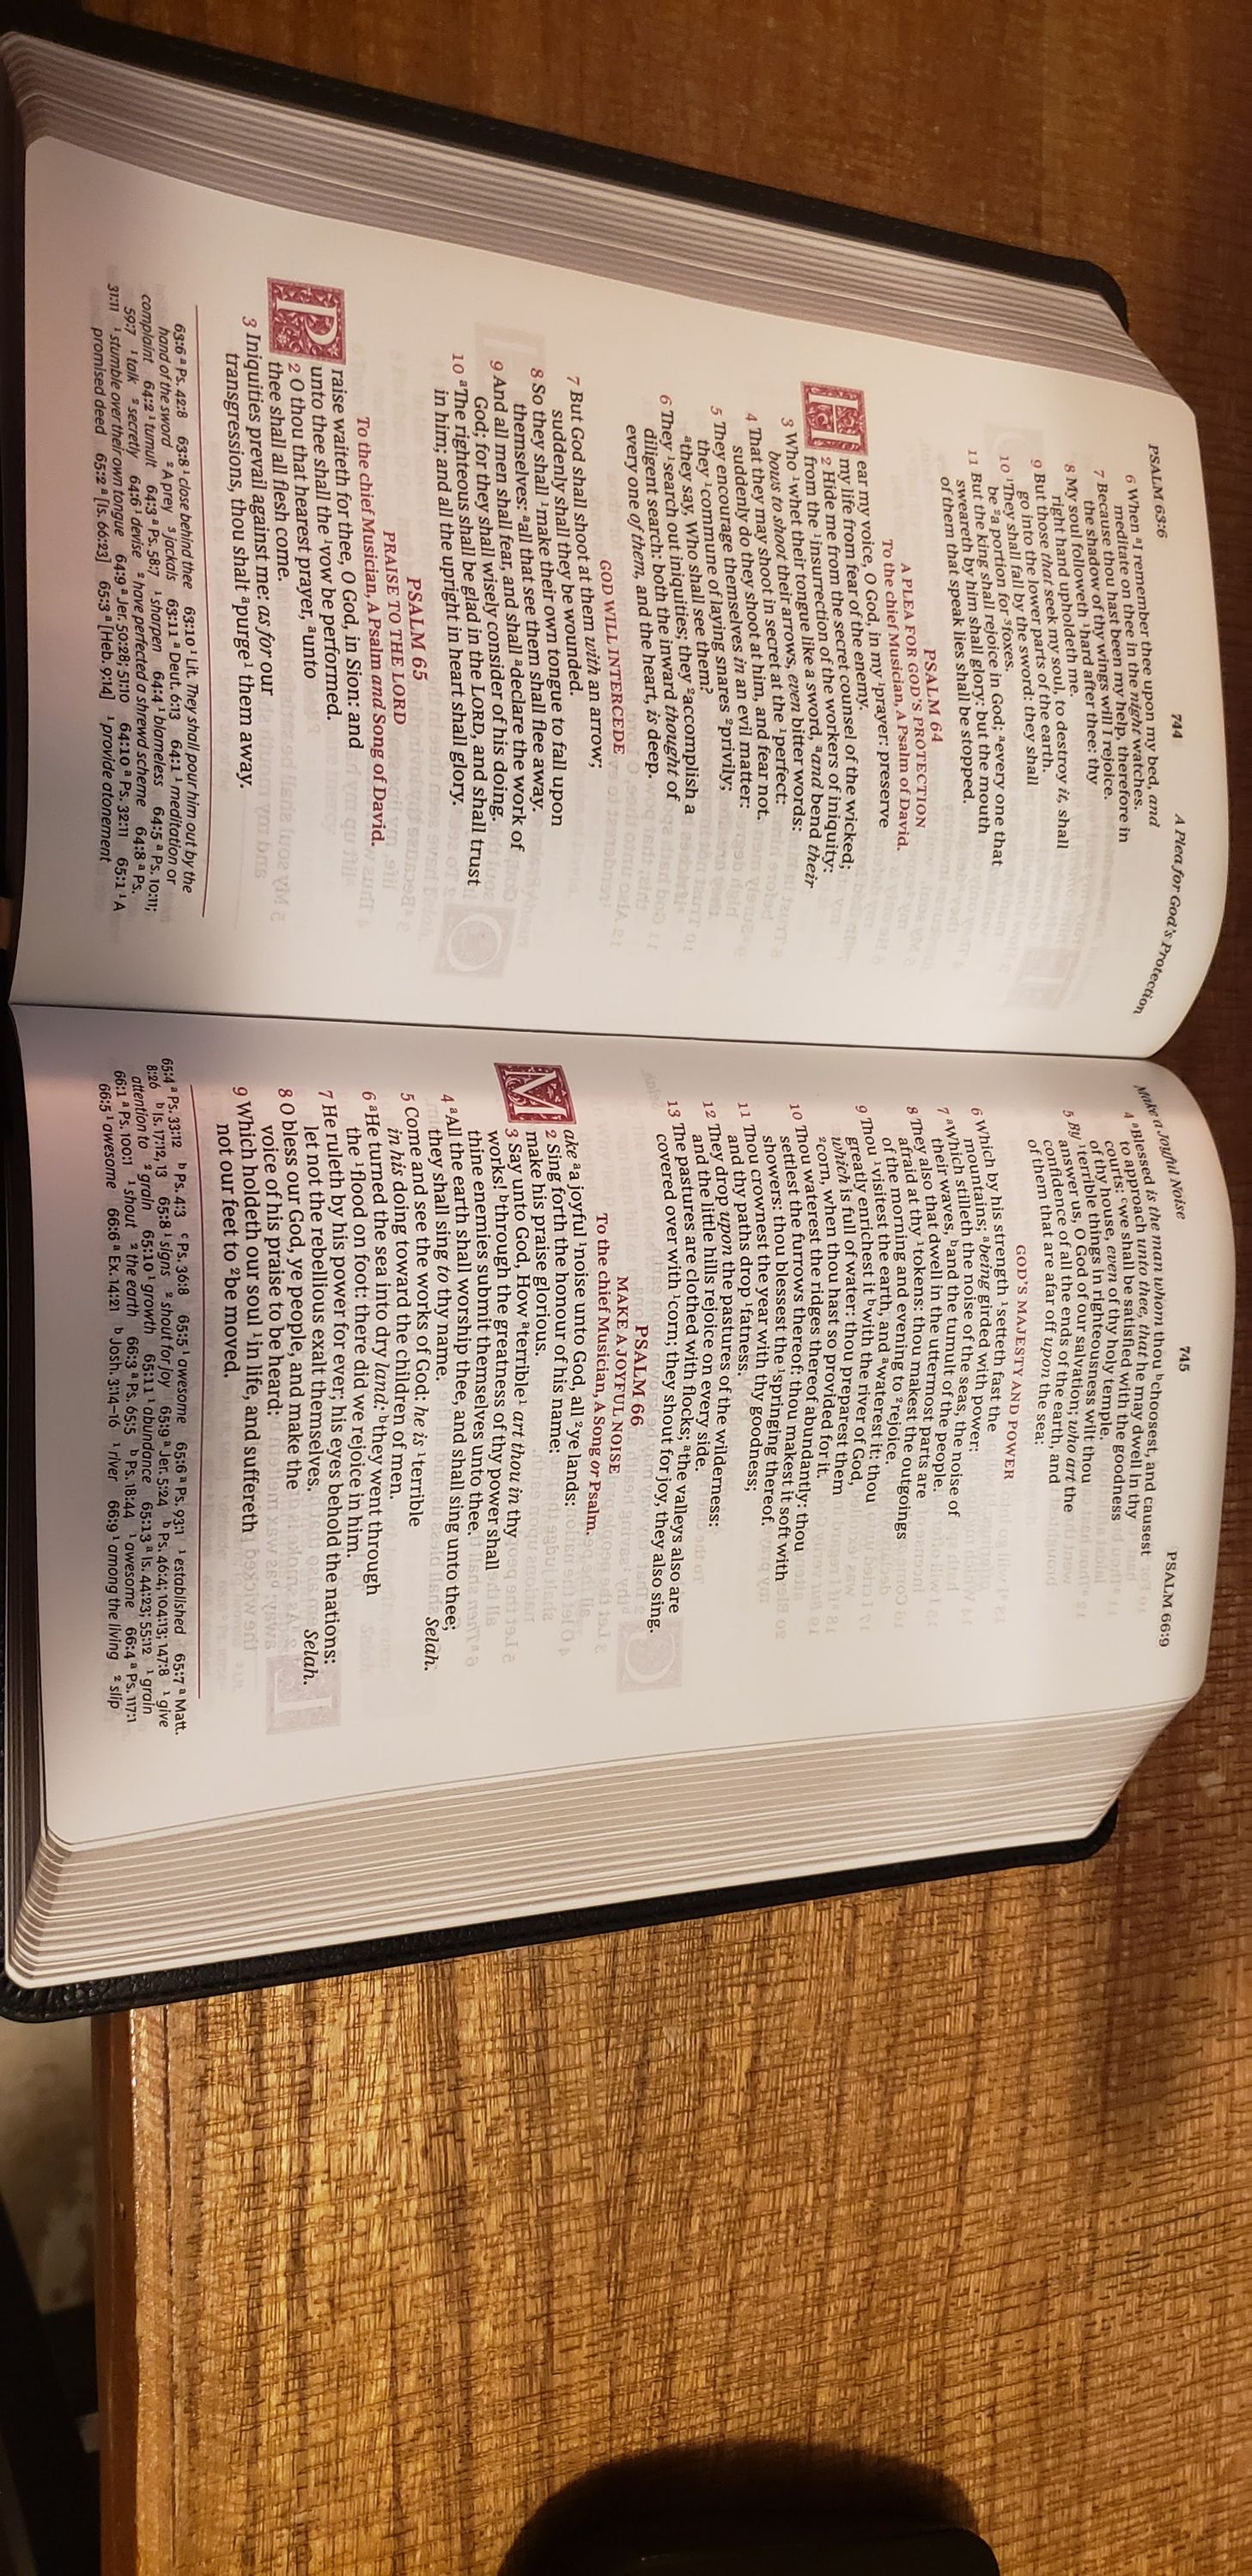 Open bible showing the Psalms